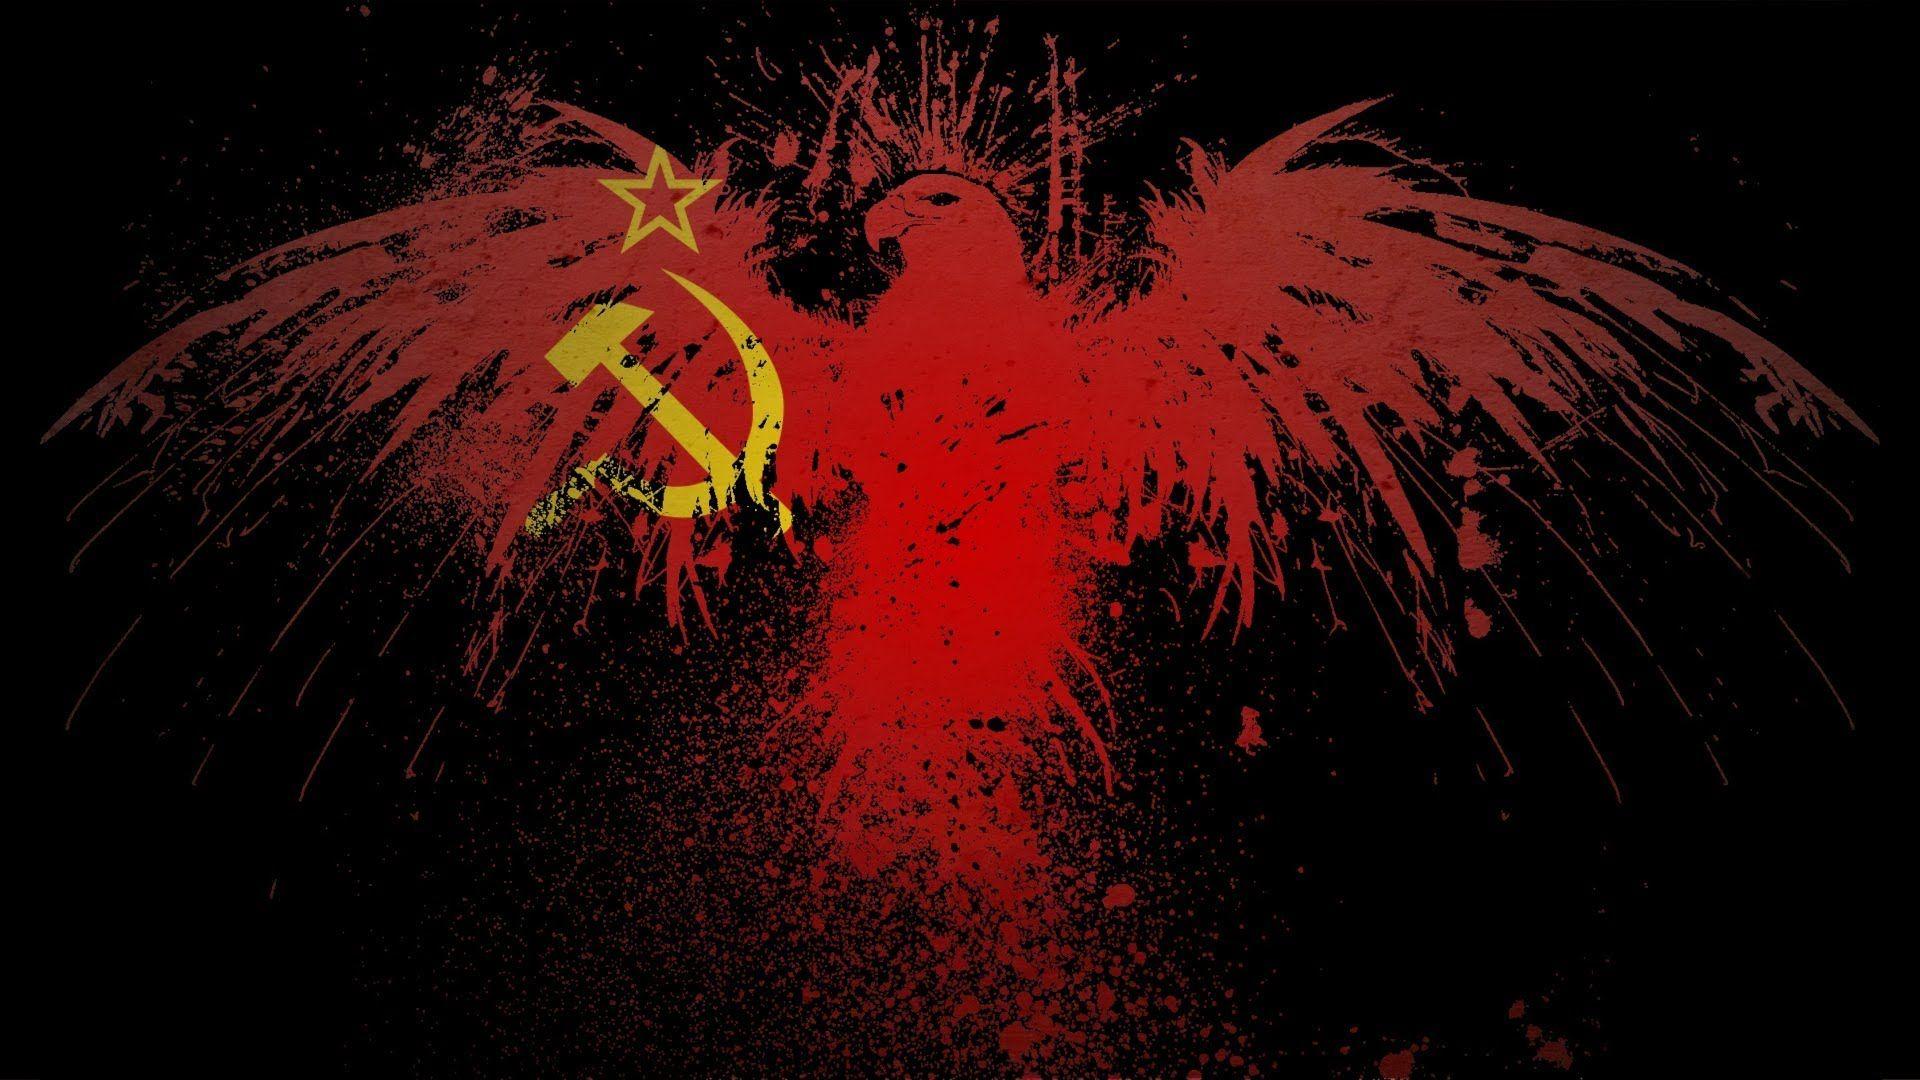 CCCP Wallpapers - Top Free CCCP Backgrounds - WallpaperAccess